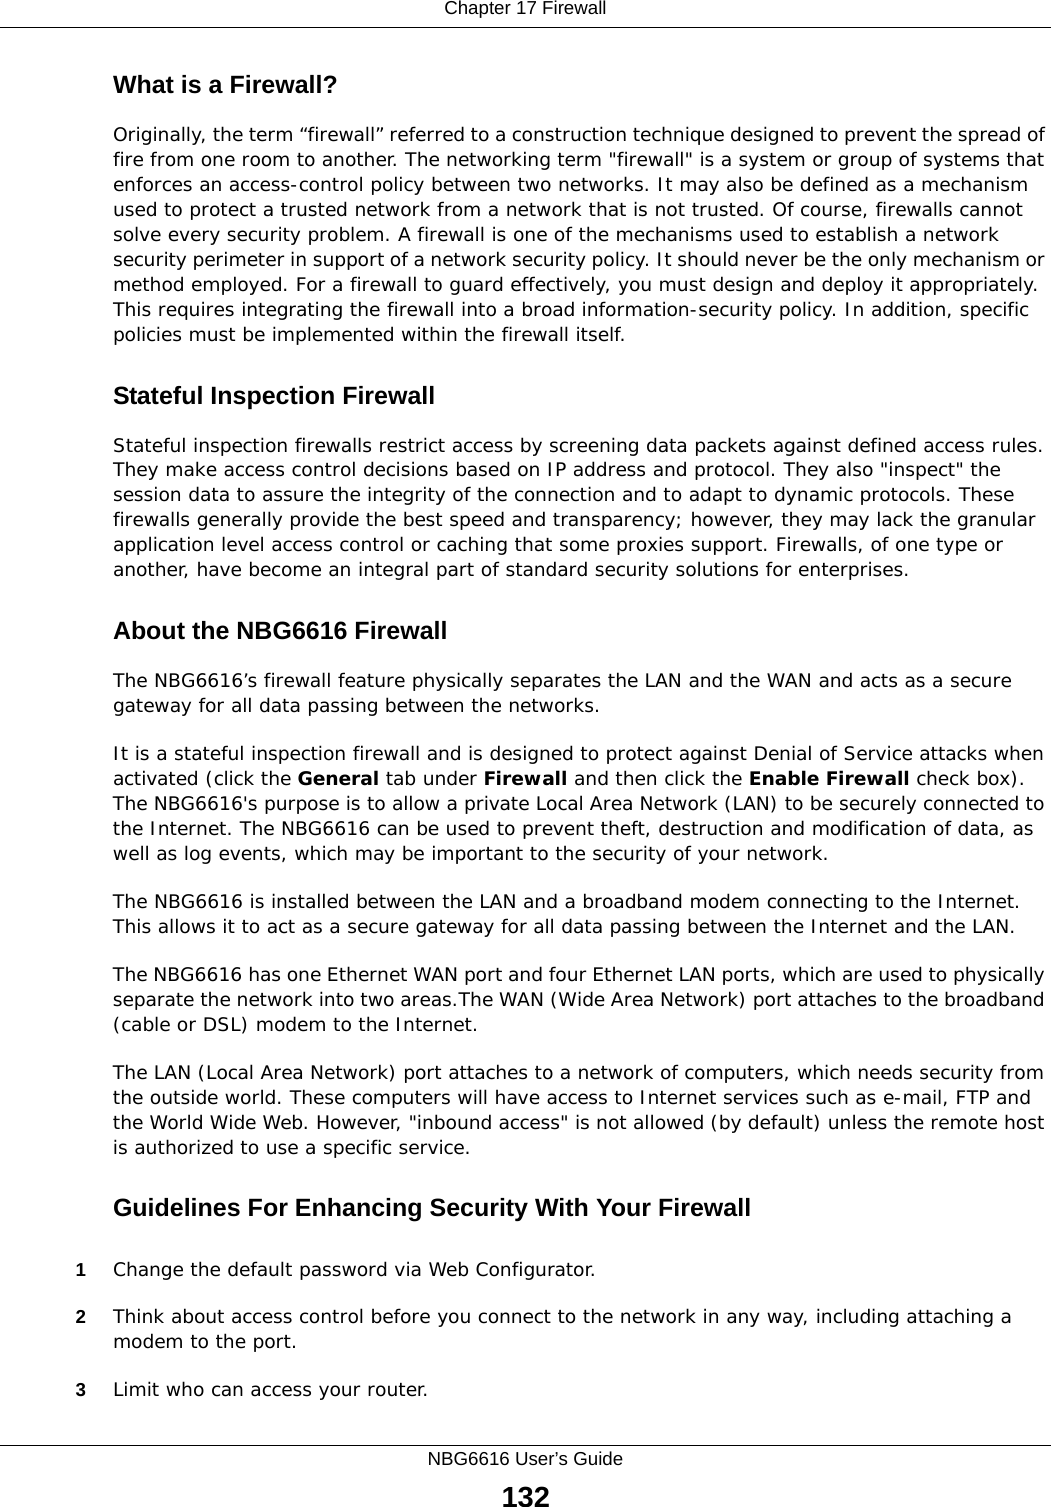 Chapter 17 FirewallNBG6616 User’s Guide132What is a Firewall?Originally, the term “firewall” referred to a construction technique designed to prevent the spread of fire from one room to another. The networking term &quot;firewall&quot; is a system or group of systems that enforces an access-control policy between two networks. It may also be defined as a mechanism used to protect a trusted network from a network that is not trusted. Of course, firewalls cannot solve every security problem. A firewall is one of the mechanisms used to establish a network security perimeter in support of a network security policy. It should never be the only mechanism or method employed. For a firewall to guard effectively, you must design and deploy it appropriately. This requires integrating the firewall into a broad information-security policy. In addition, specific policies must be implemented within the firewall itself. Stateful Inspection Firewall Stateful inspection firewalls restrict access by screening data packets against defined access rules. They make access control decisions based on IP address and protocol. They also &quot;inspect&quot; the session data to assure the integrity of the connection and to adapt to dynamic protocols. These firewalls generally provide the best speed and transparency; however, they may lack the granular application level access control or caching that some proxies support. Firewalls, of one type or another, have become an integral part of standard security solutions for enterprises.About the NBG6616 FirewallThe NBG6616’s firewall feature physically separates the LAN and the WAN and acts as a secure gateway for all data passing between the networks.It is a stateful inspection firewall and is designed to protect against Denial of Service attacks when activated (click the General tab under Firewall and then click the Enable Firewall check box). The NBG6616&apos;s purpose is to allow a private Local Area Network (LAN) to be securely connected to the Internet. The NBG6616 can be used to prevent theft, destruction and modification of data, as well as log events, which may be important to the security of your network. The NBG6616 is installed between the LAN and a broadband modem connecting to the Internet. This allows it to act as a secure gateway for all data passing between the Internet and the LAN.The NBG6616 has one Ethernet WAN port and four Ethernet LAN ports, which are used to physically separate the network into two areas.The WAN (Wide Area Network) port attaches to the broadband (cable or DSL) modem to the Internet.The LAN (Local Area Network) port attaches to a network of computers, which needs security from the outside world. These computers will have access to Internet services such as e-mail, FTP and the World Wide Web. However, &quot;inbound access&quot; is not allowed (by default) unless the remote host is authorized to use a specific service.Guidelines For Enhancing Security With Your Firewall1Change the default password via Web Configurator. 2Think about access control before you connect to the network in any way, including attaching a modem to the port. 3Limit who can access your router. 